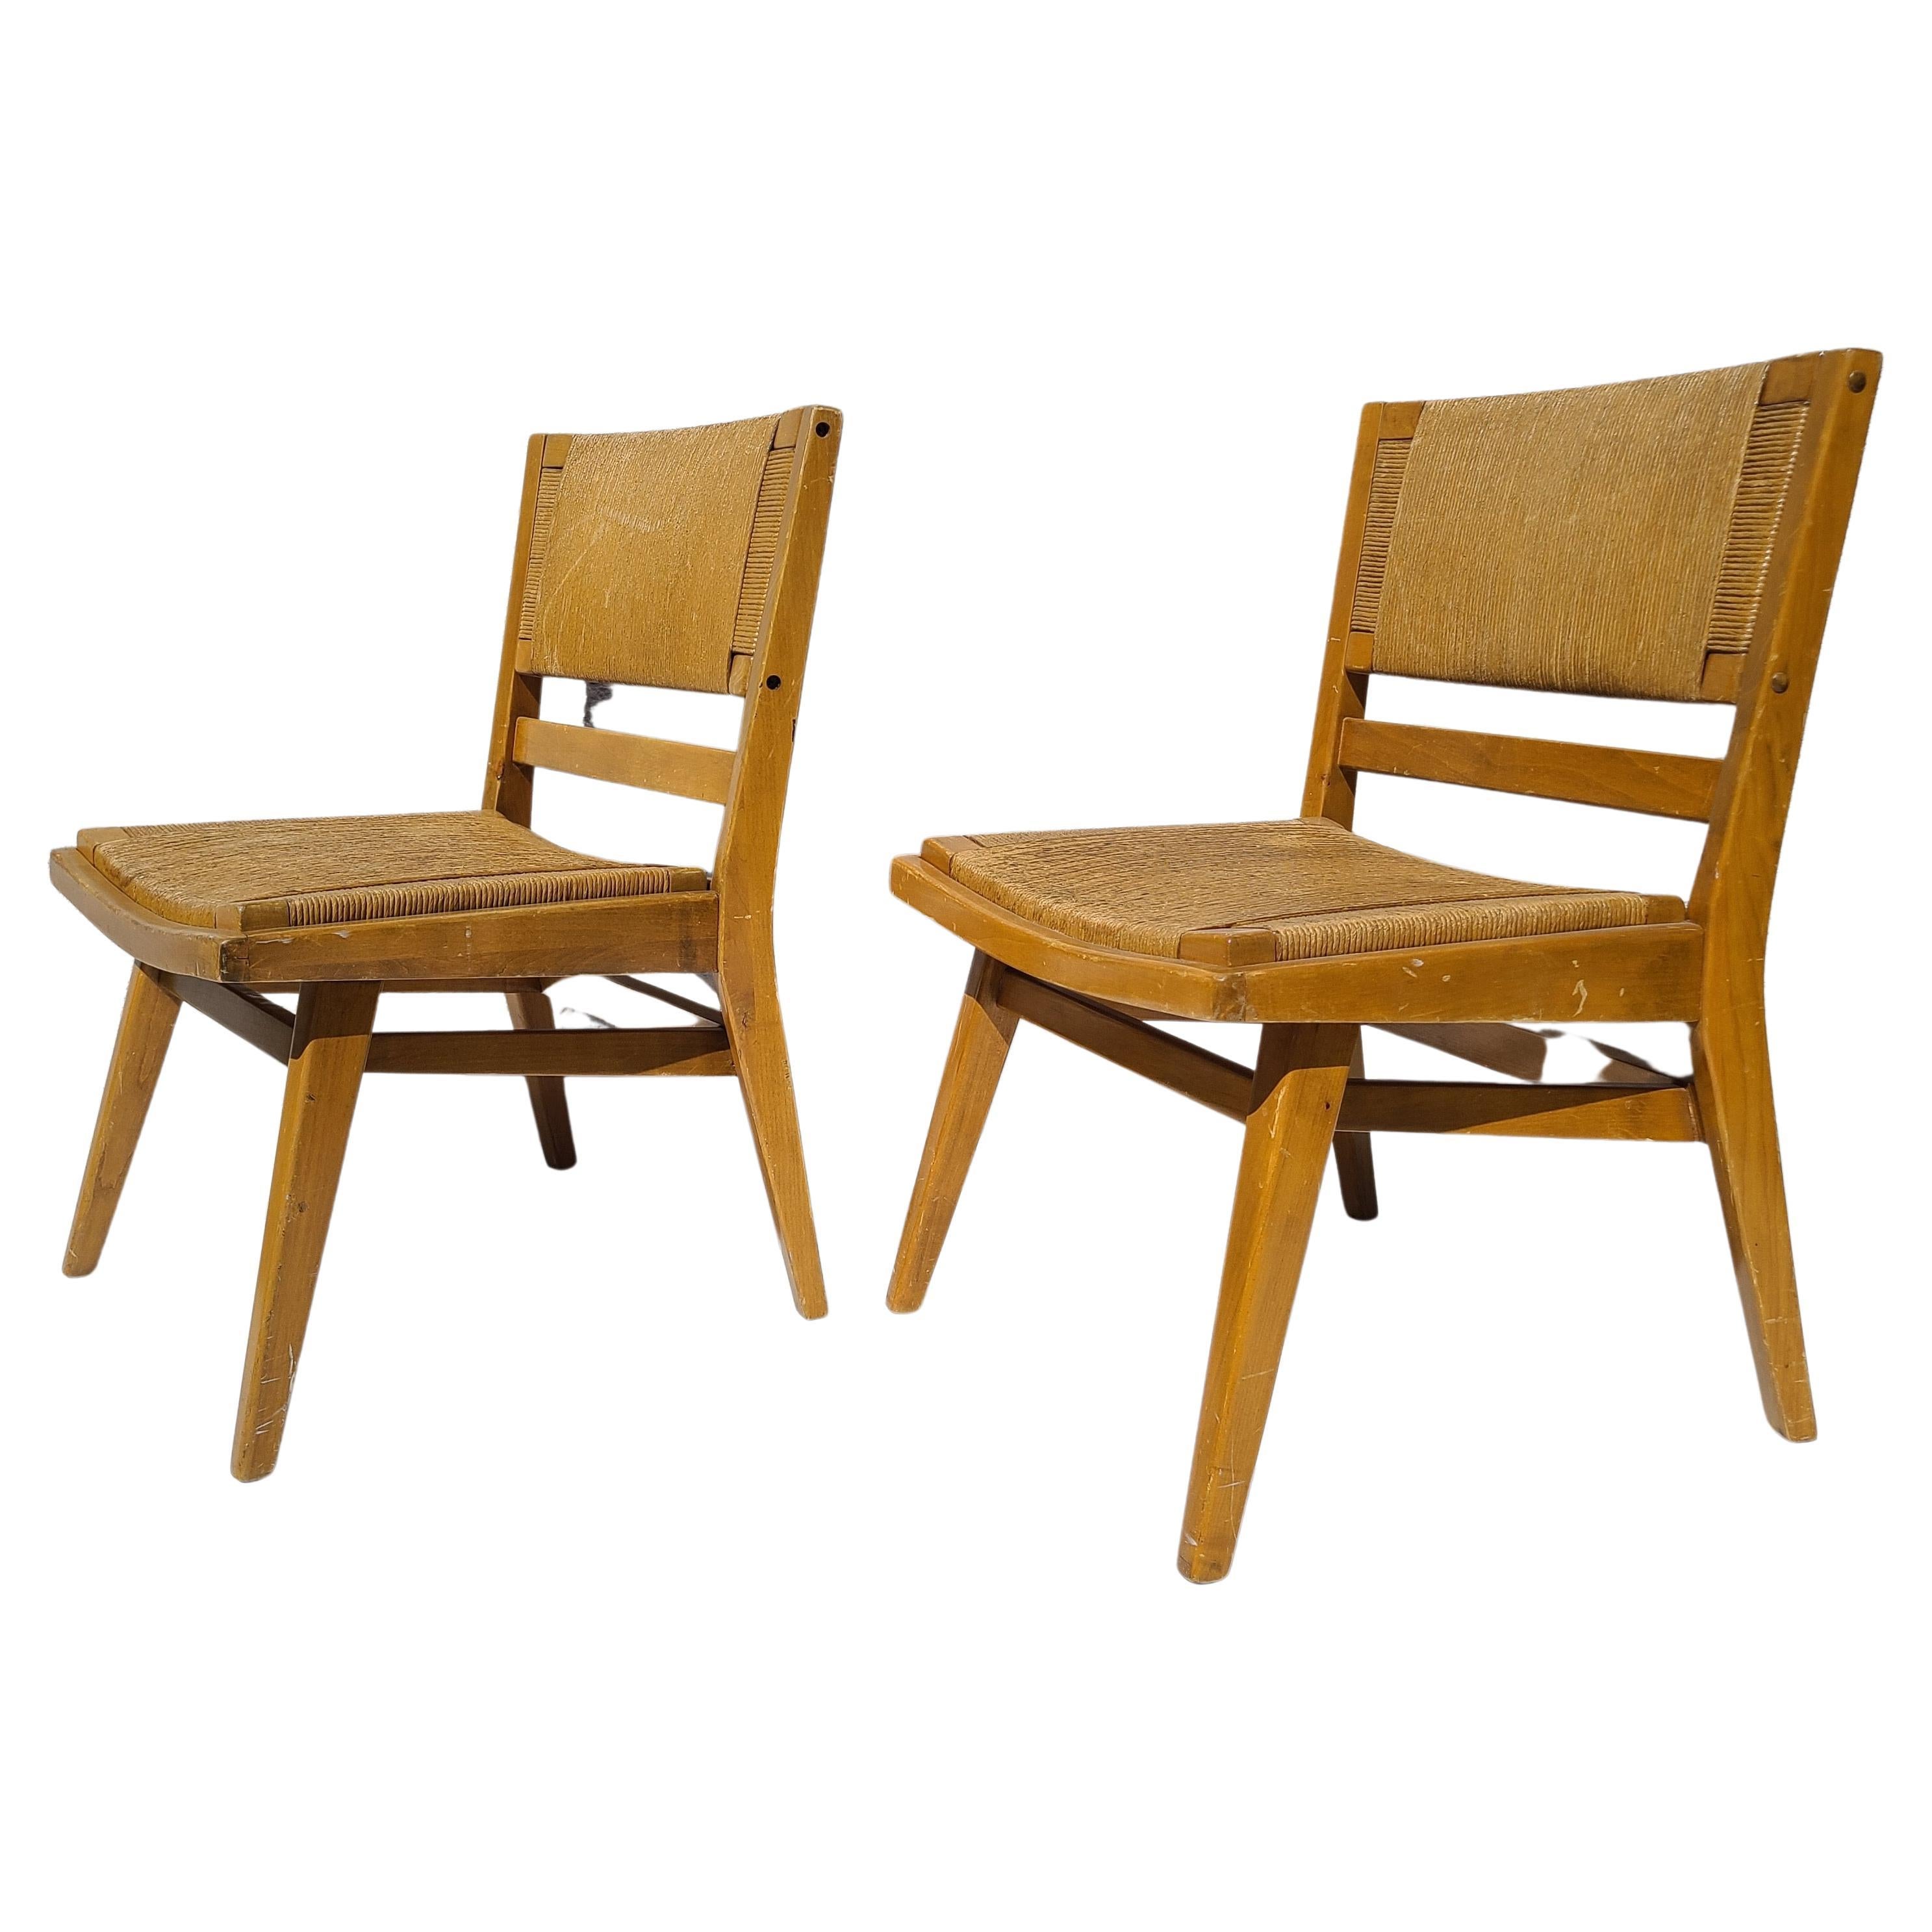 Please message us for a cost effective shipping quote to your location.

Pair Mid Century Modern Tacoma Chairs by Warner Cleveland.
Made by Northwest Chair Company.
Walnut and Rush construction.
Pacific Northwest Japanese-American design influence.